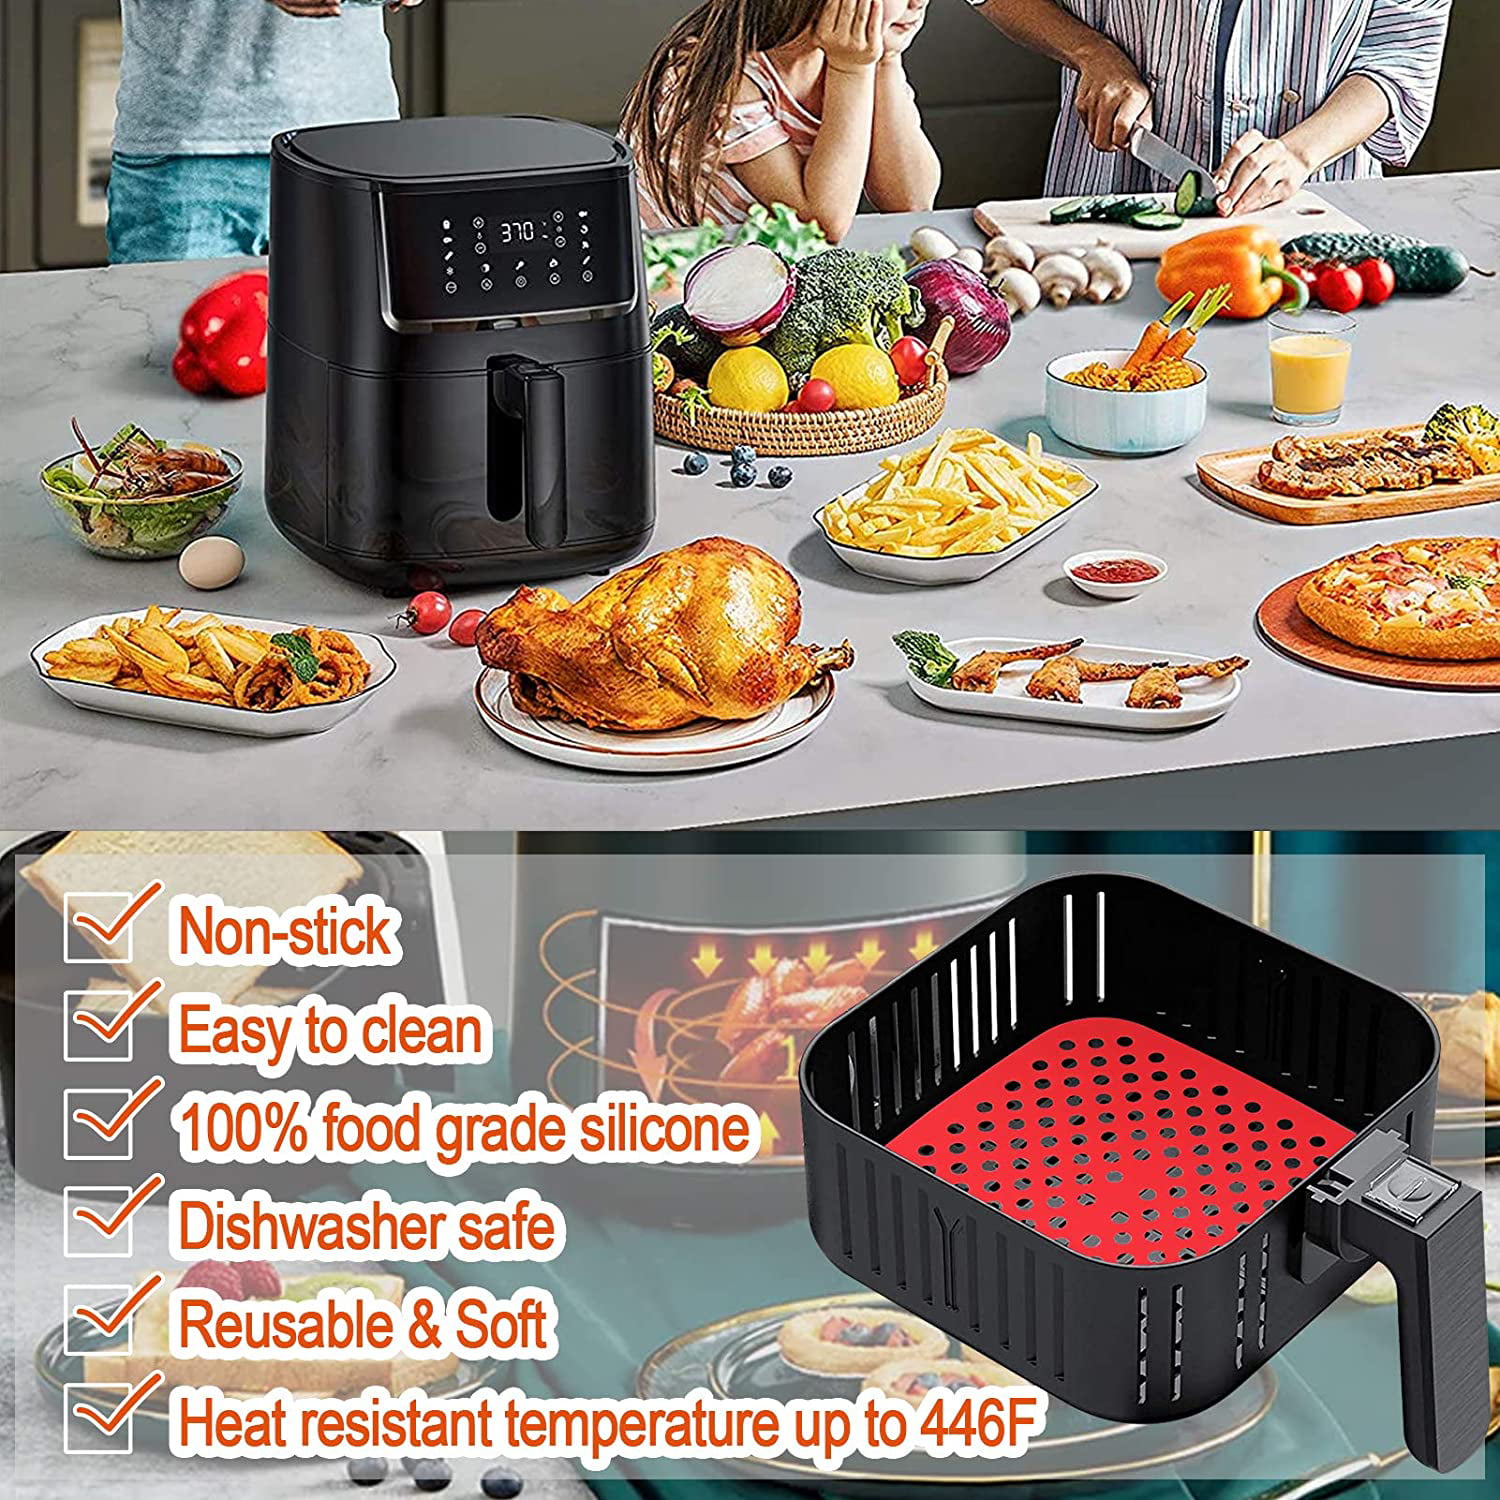 Reusable Air Fryer Silicone Liners - 8.5 Inch Square Air fryer